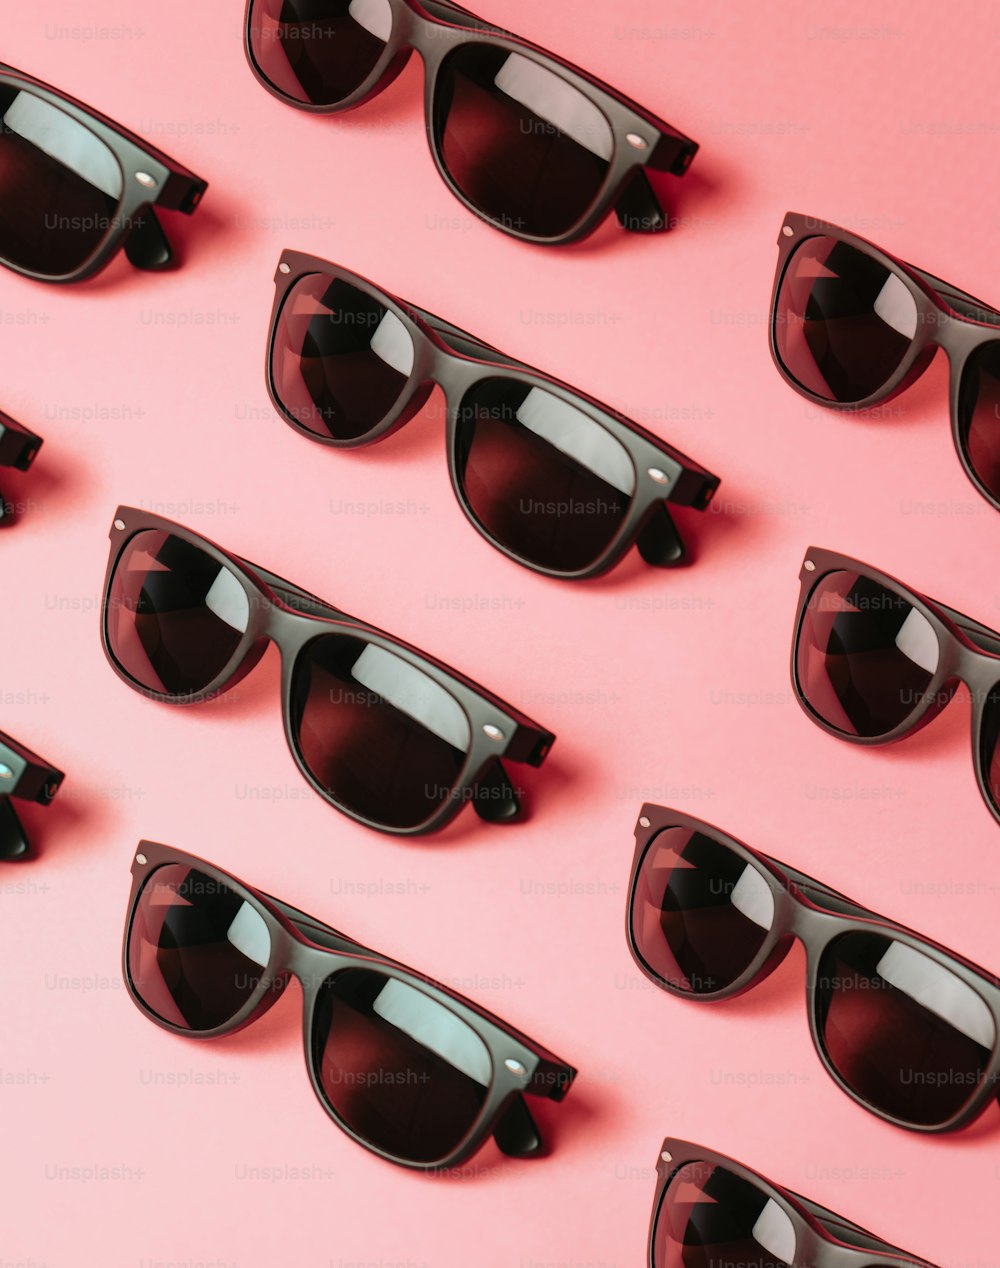 a bunch of sunglasses sitting on top of a pink surface